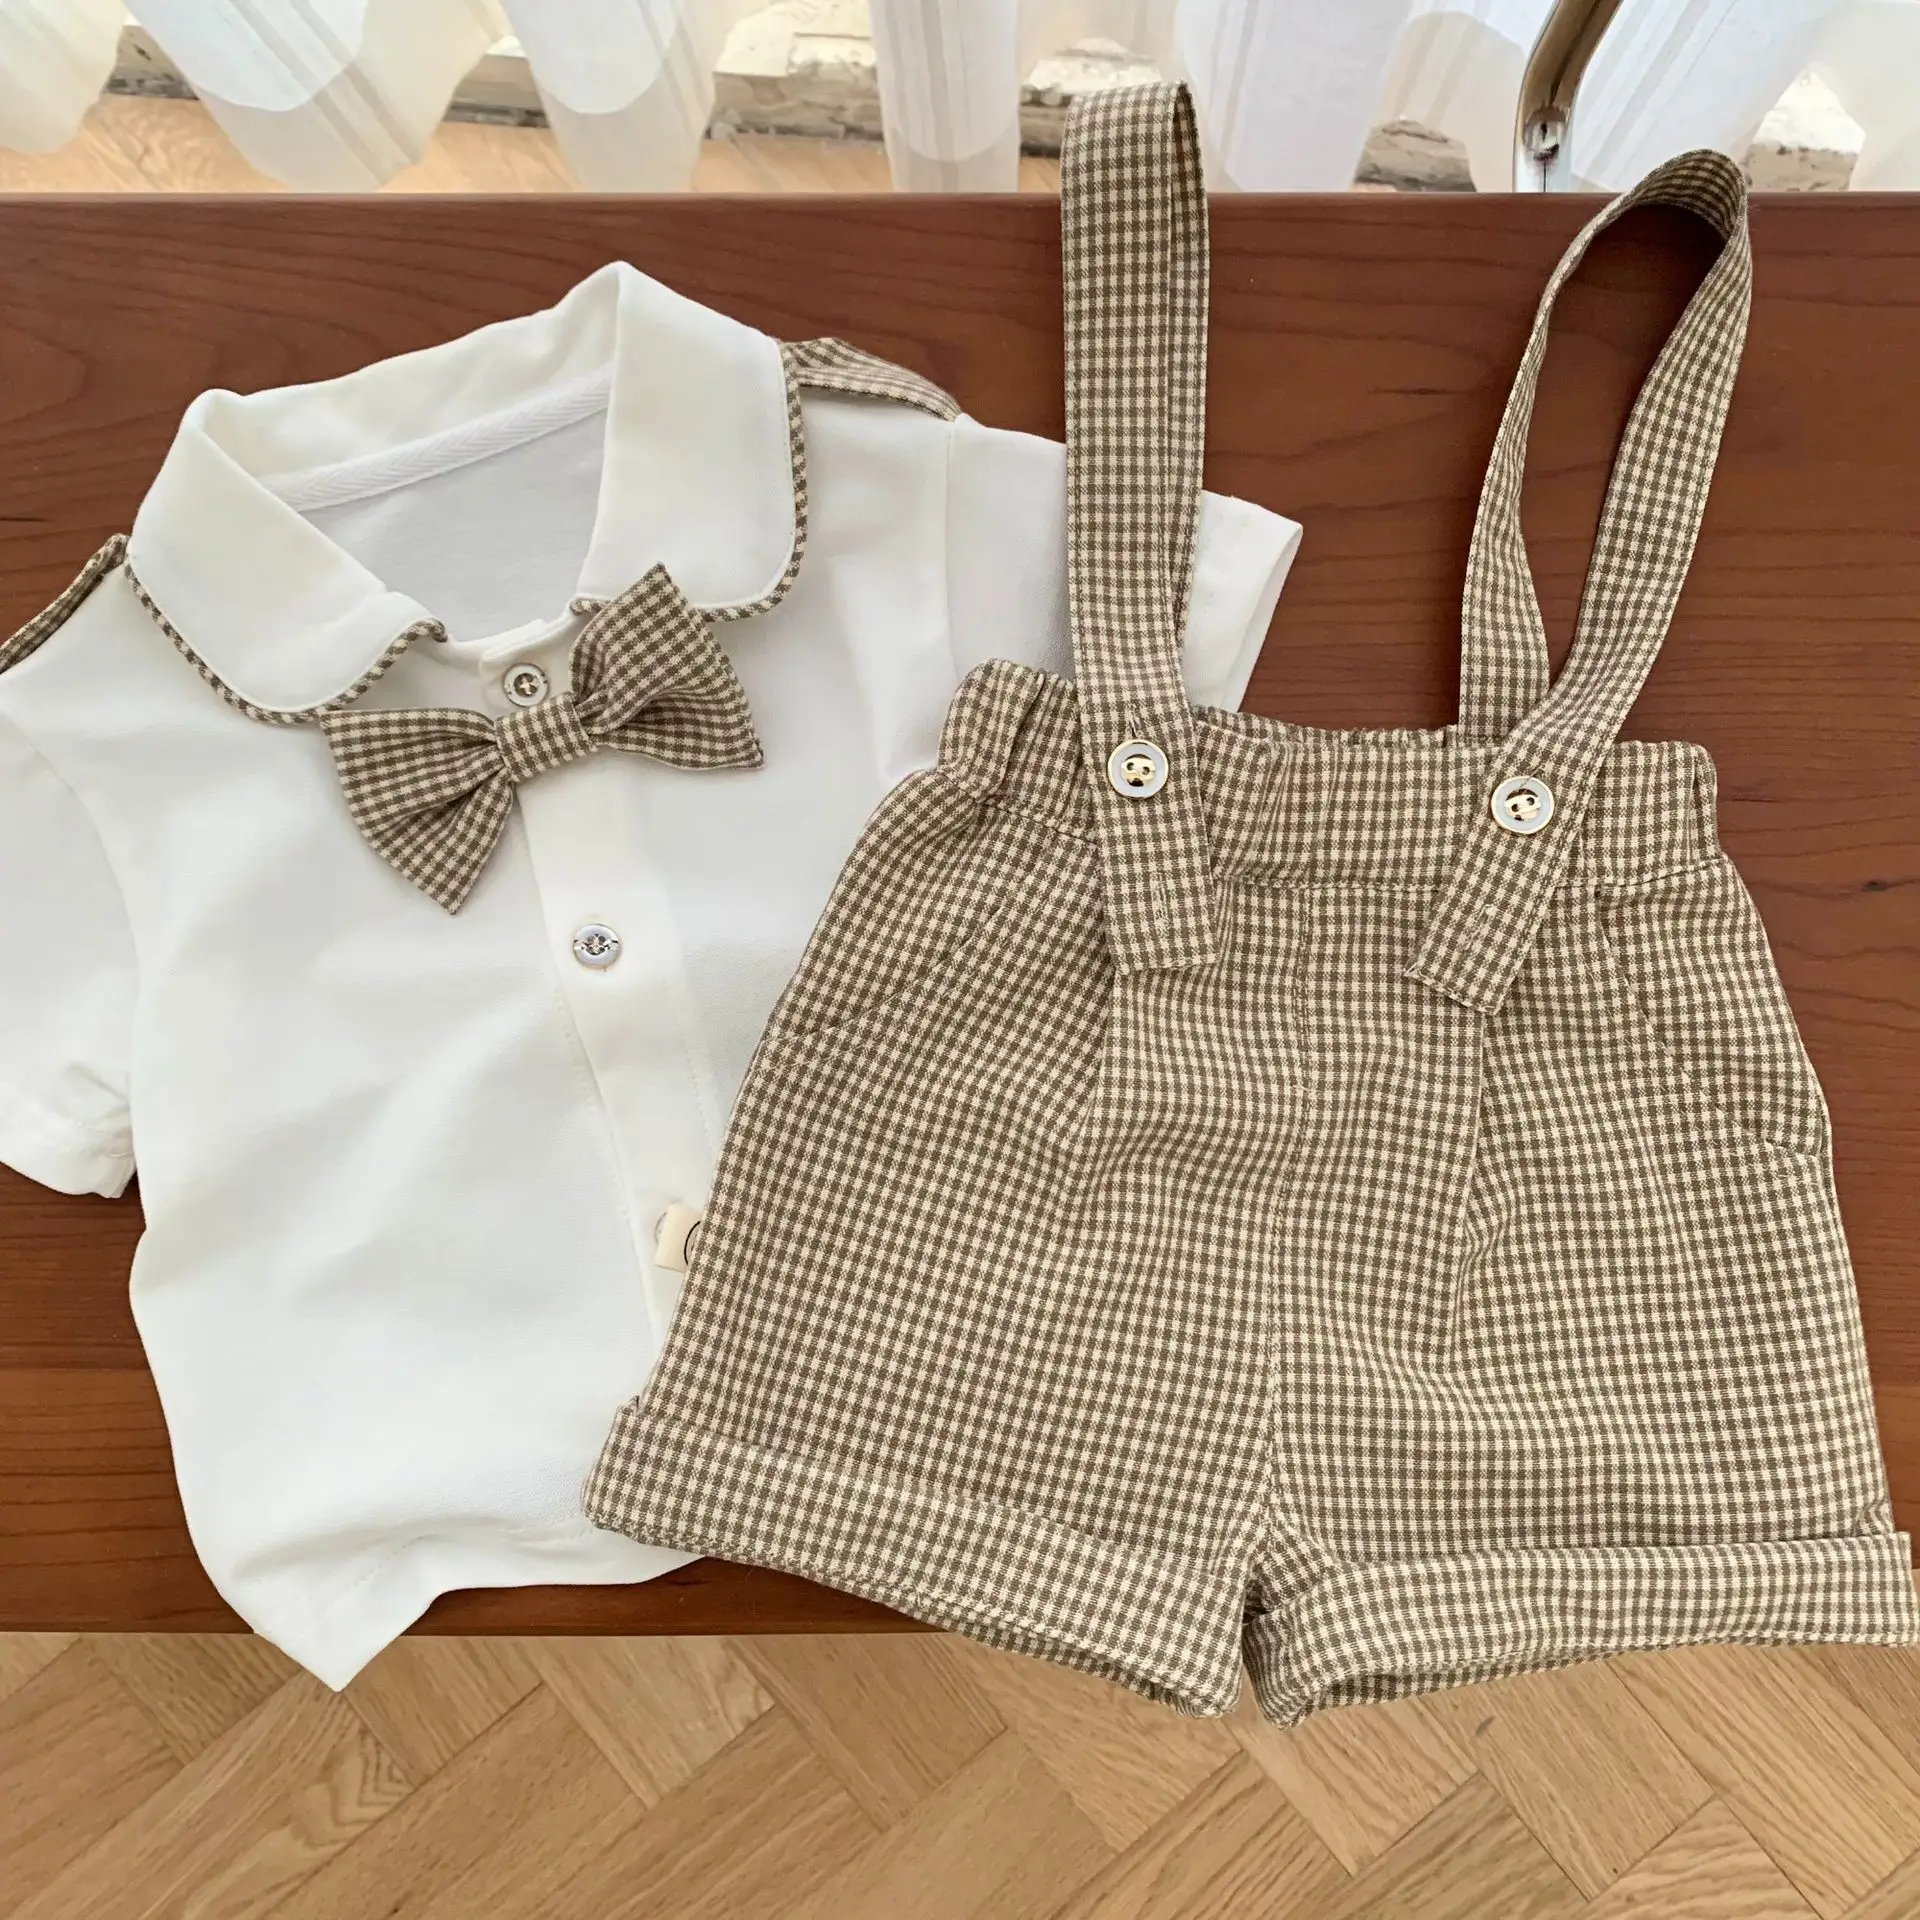 Fashion Baby Toddler Boy Formal Gentleman Suits Cute Dress Short Shirt with Bow tie+Suspender Plaid Shirts Shorts Dressy Outfit